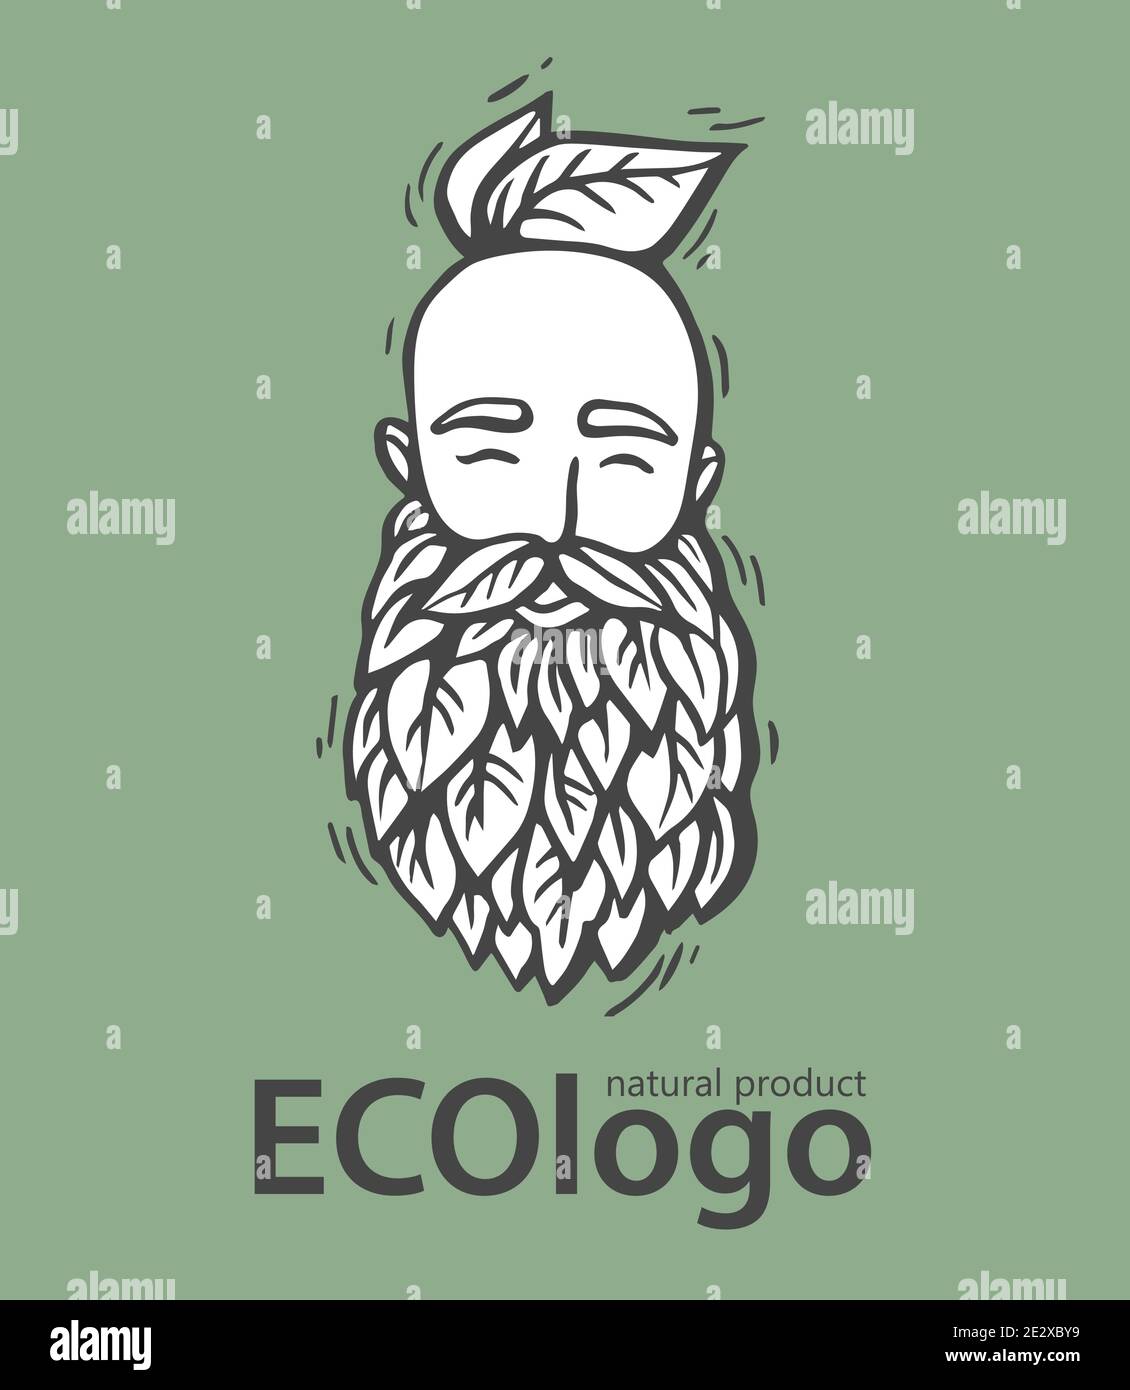 https://c8.alamy.com/comp/2E2XBY9/eco-nature-logo-hipster-head-with-blooming-beard-with-leafs-hand-drawn-vector-illustration-bearded-man-emblem-for-eco-products-2E2XBY9.jpg